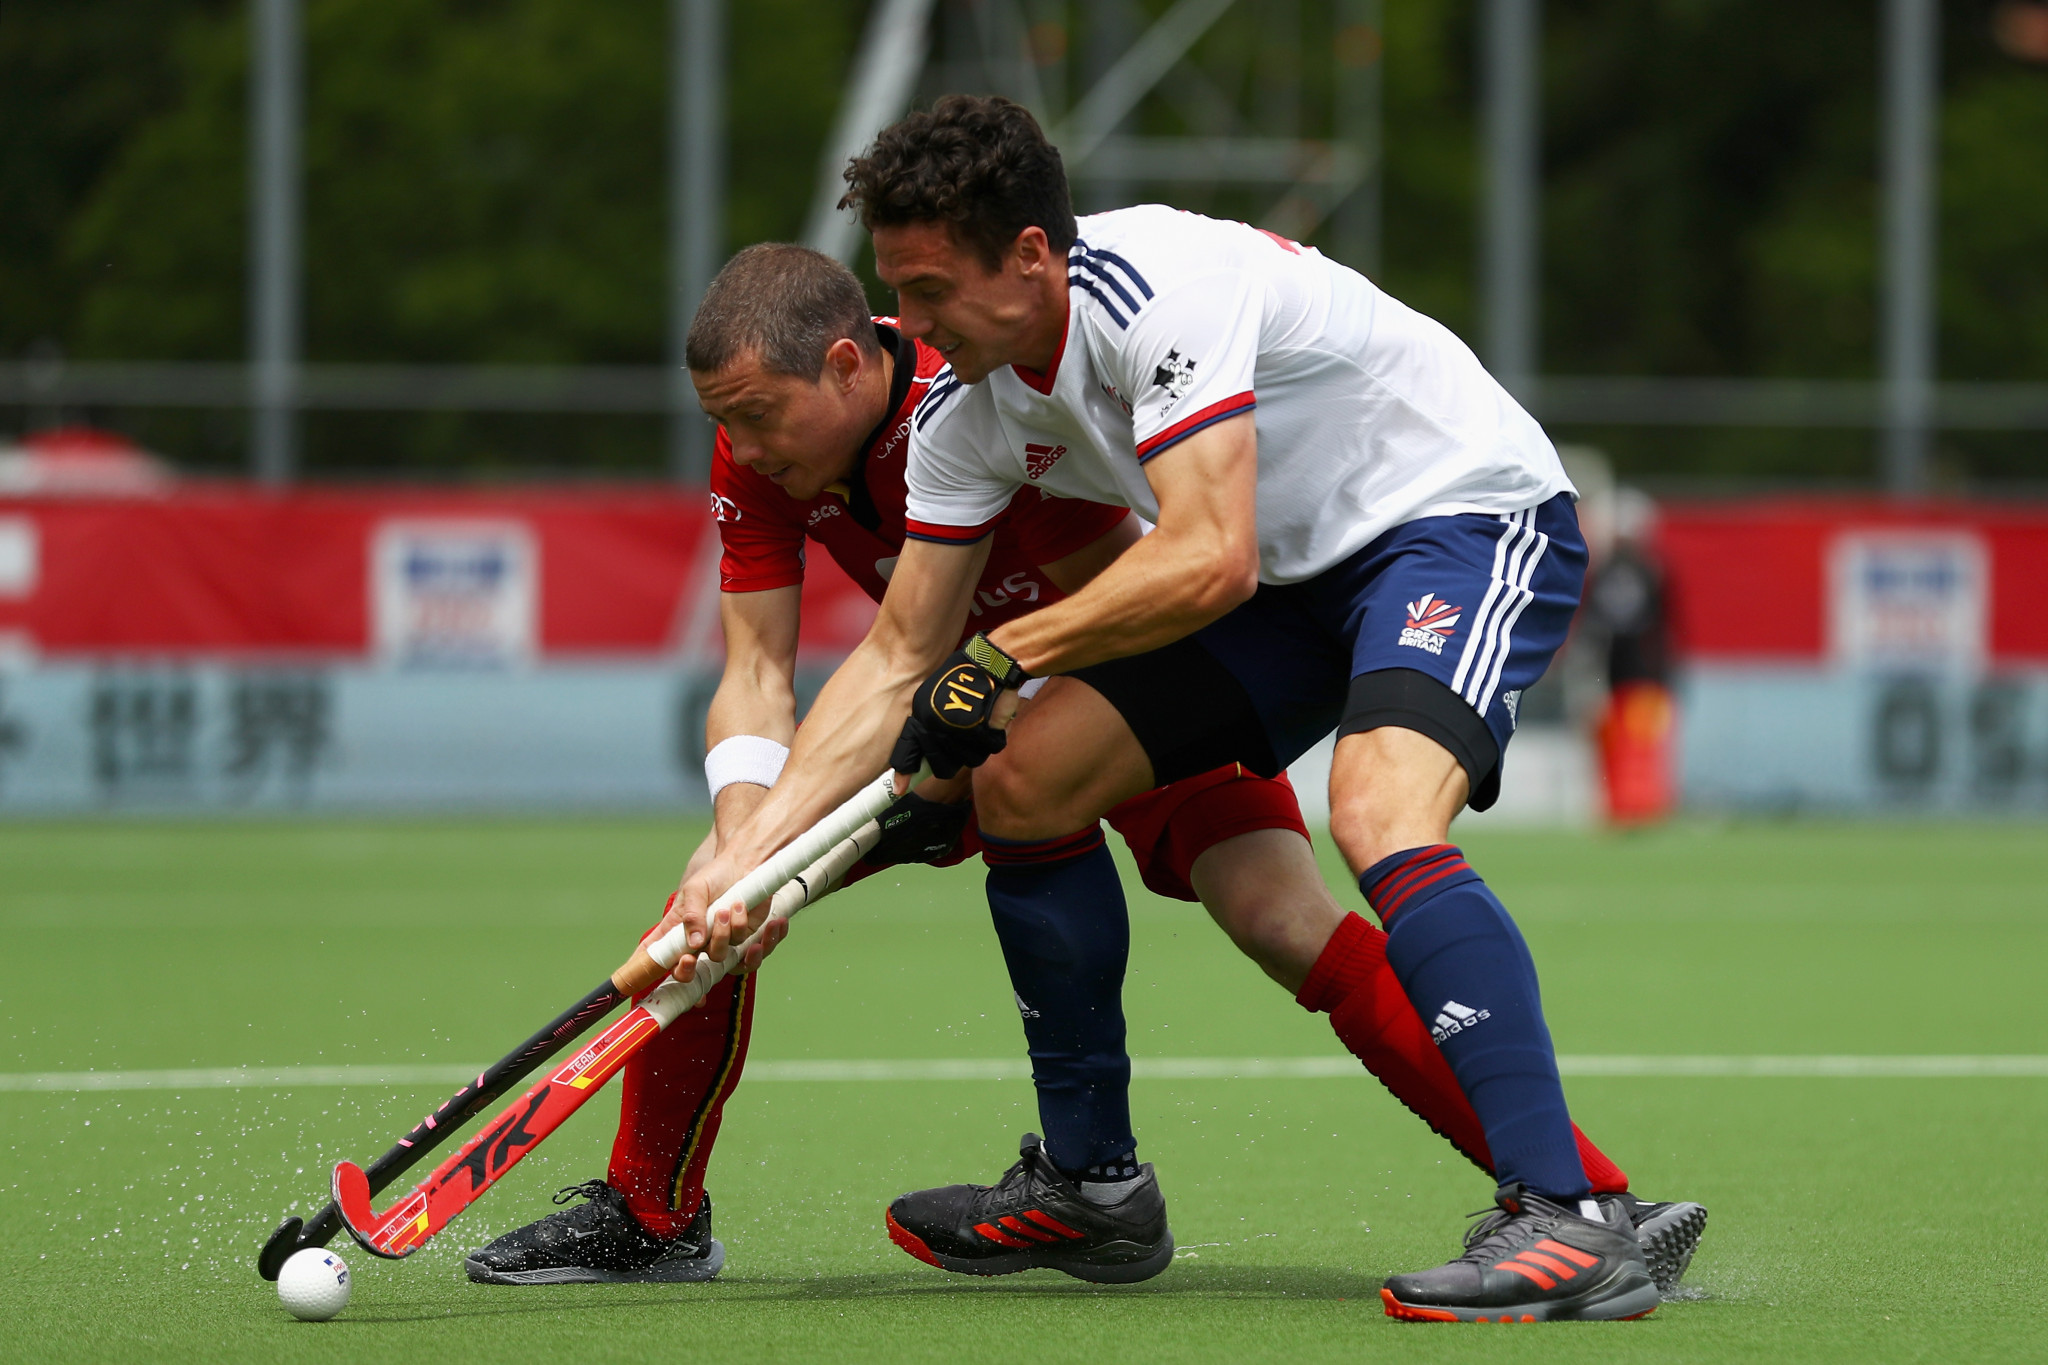 Belgium secure double victory against Britain in FIH Pro League